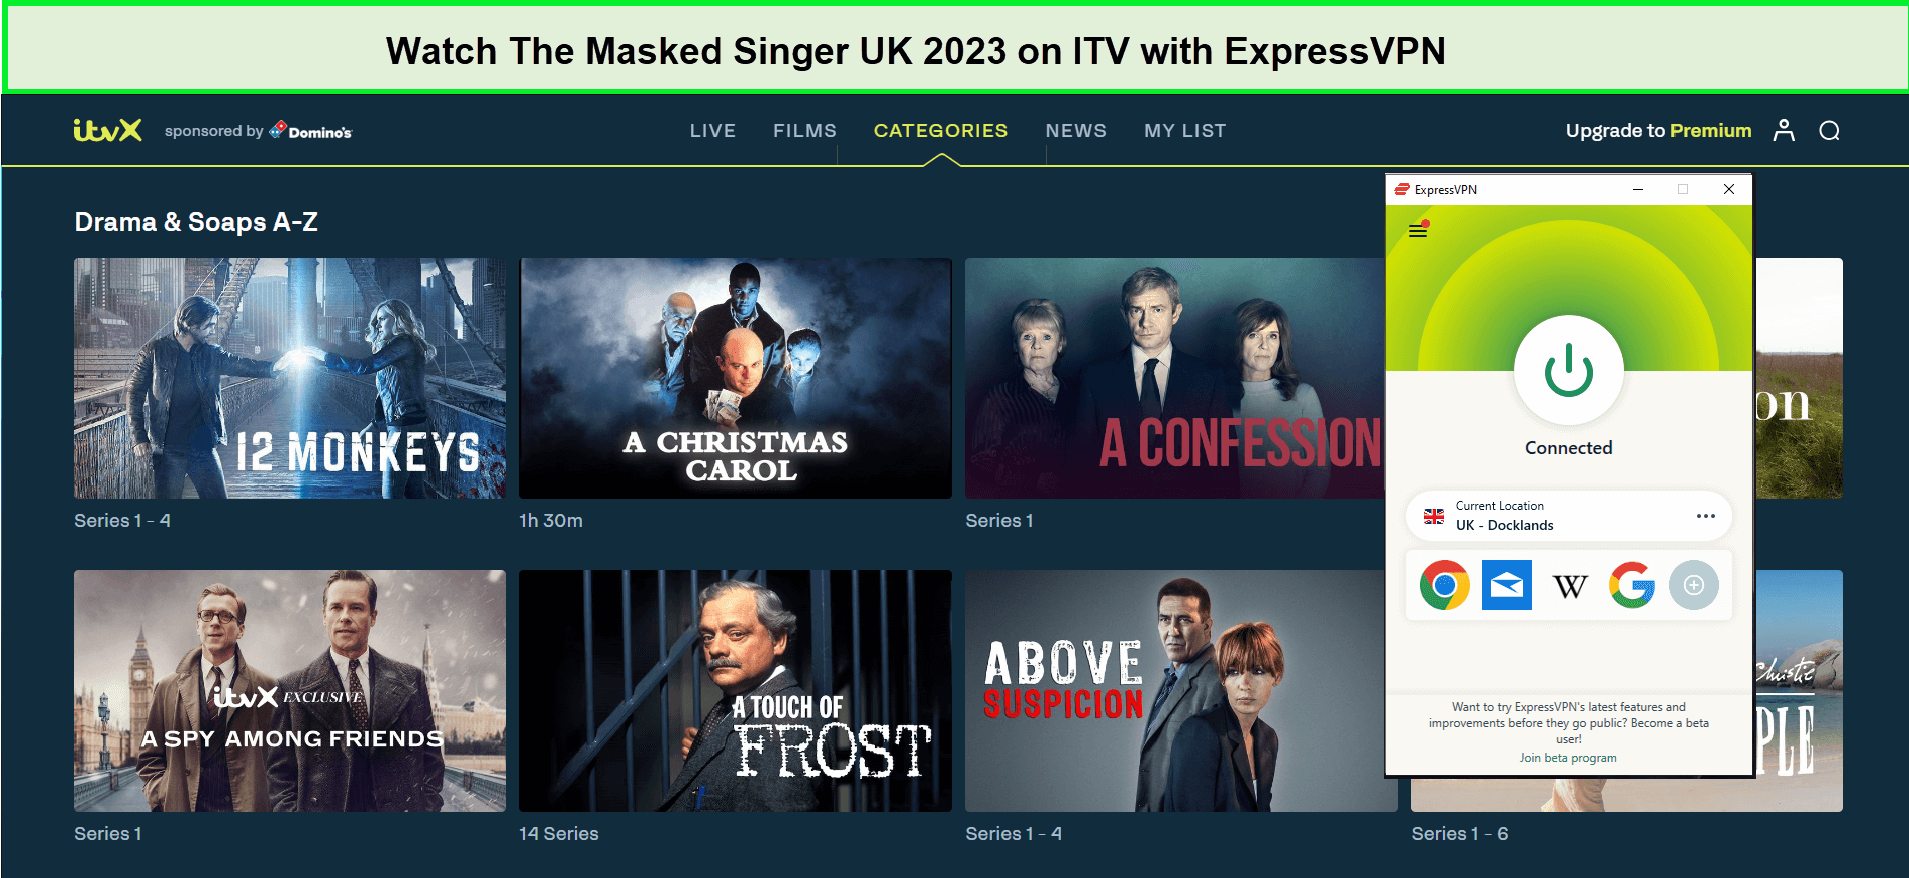 Watch-The-Masked-Singer-UK-2023-in-Italy-on-ITV-with-ExpressVPN